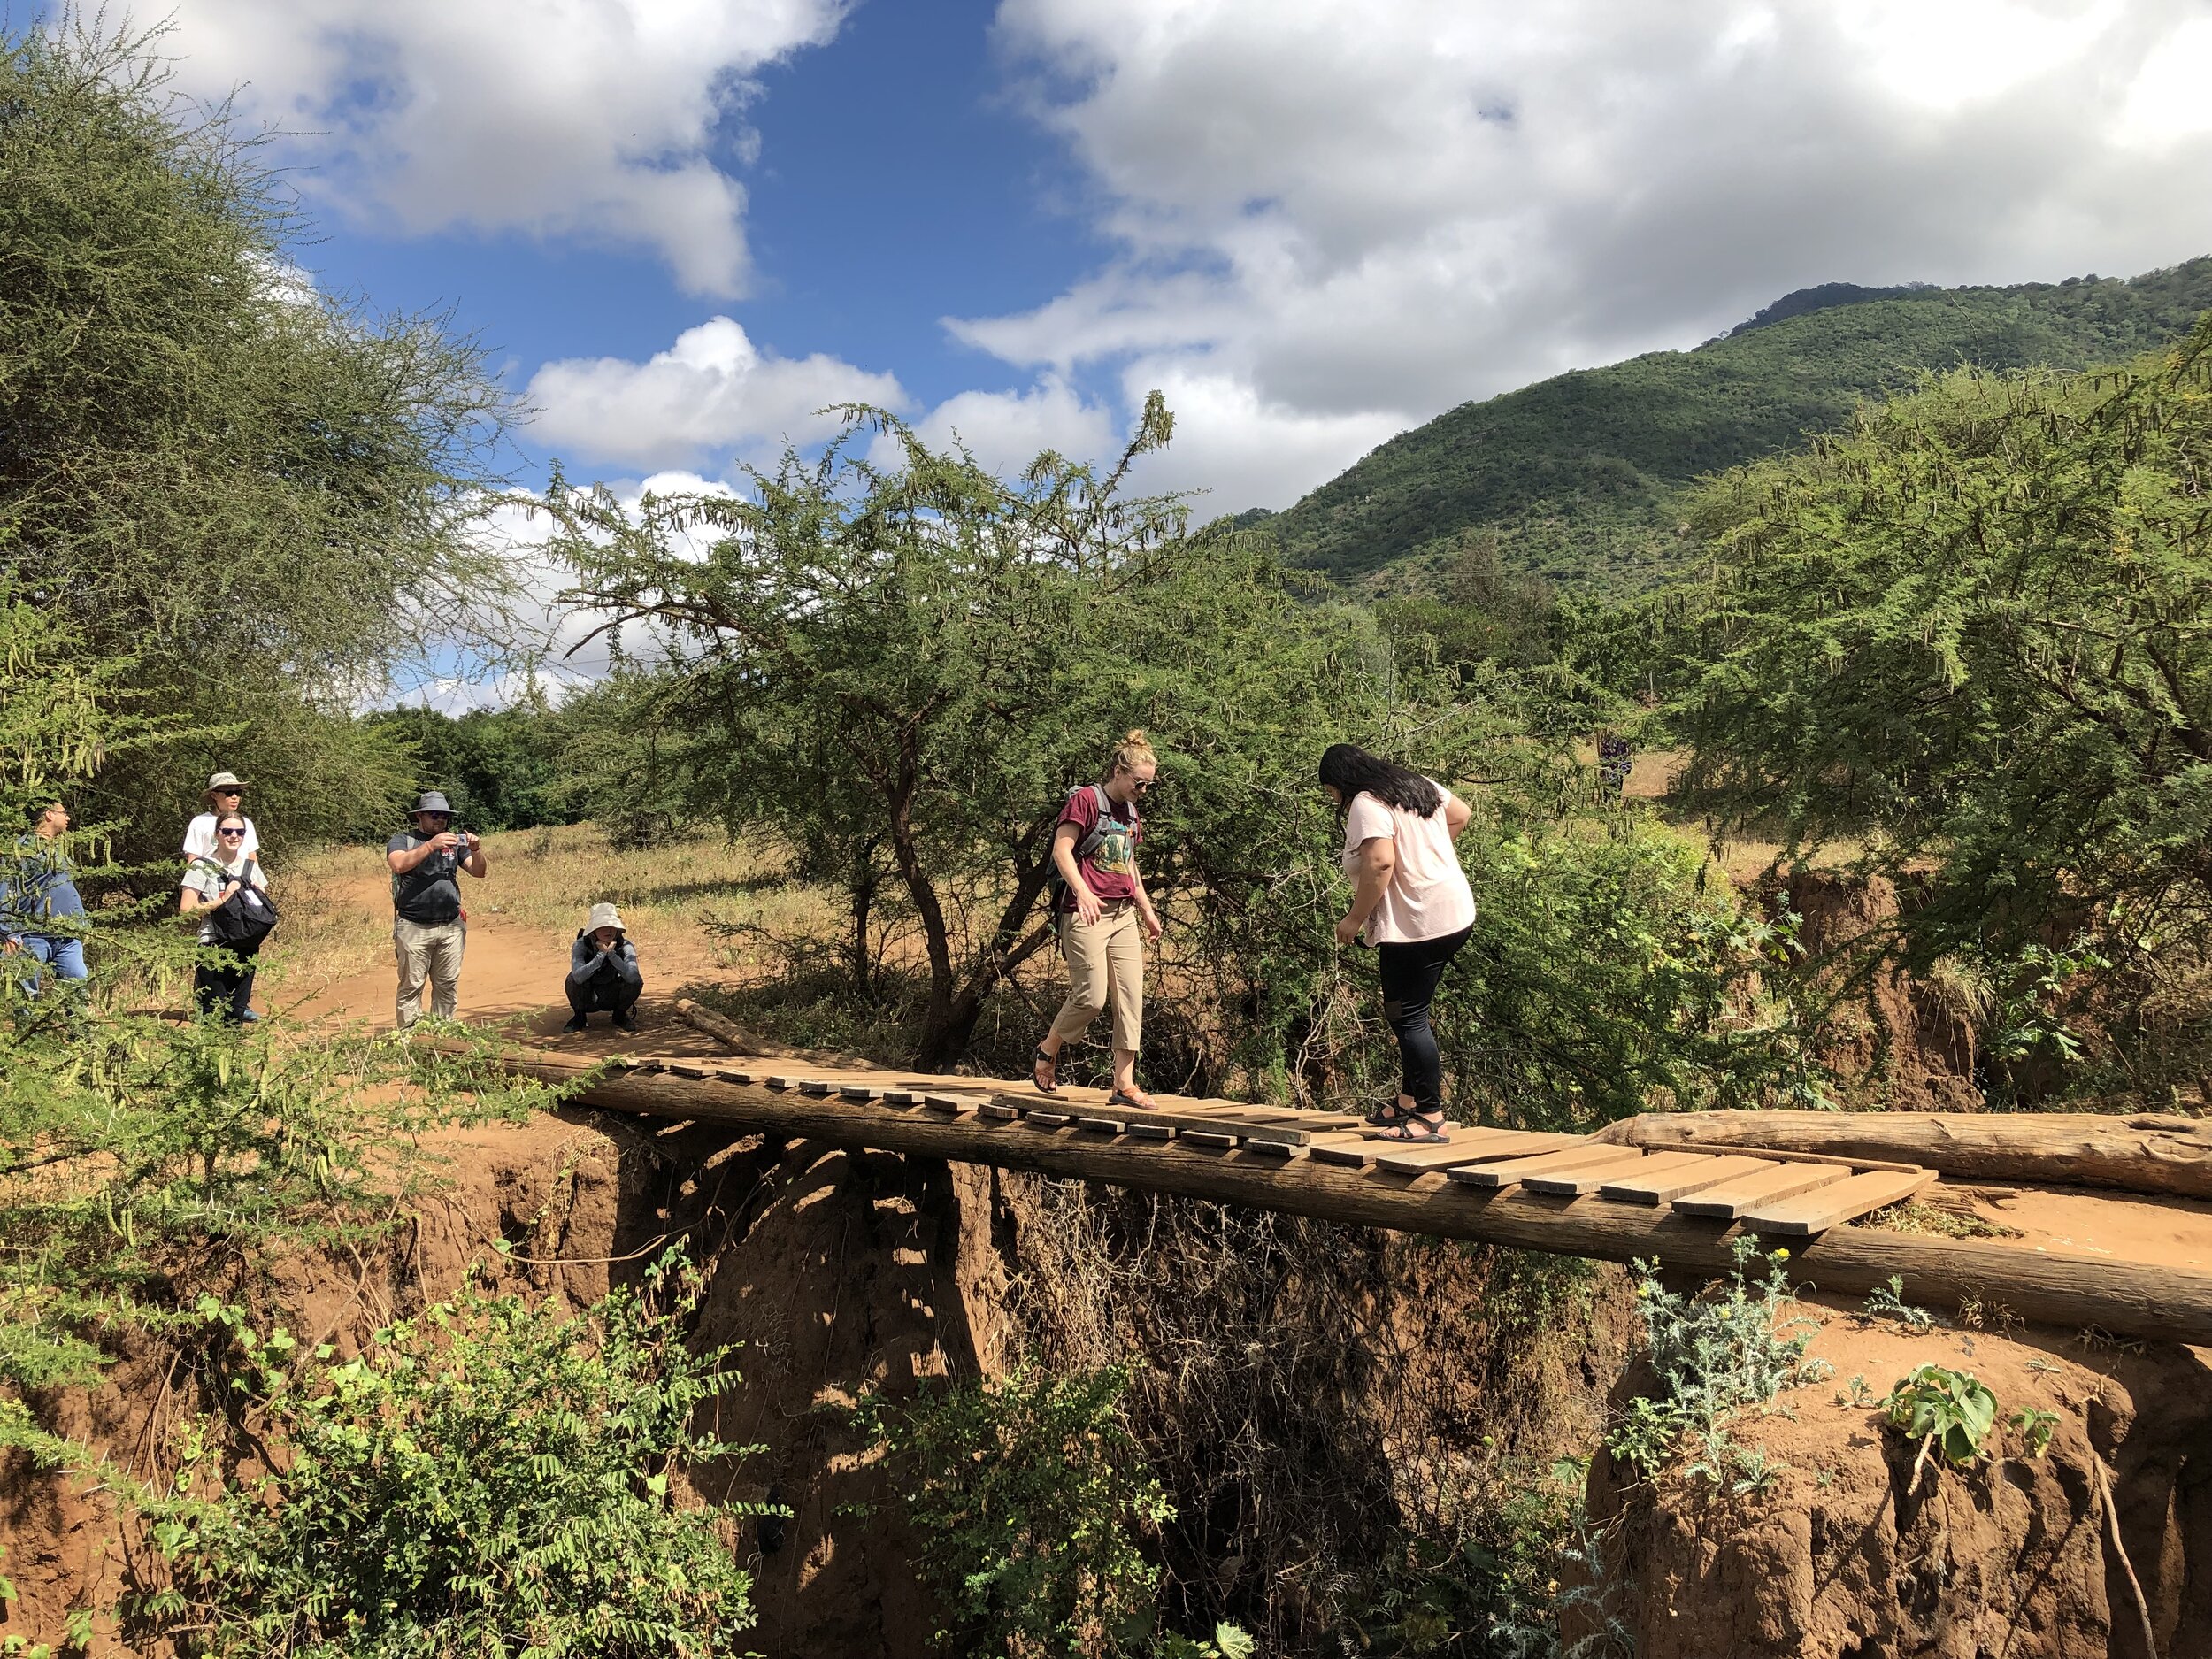 The Cal Poly students reach the existing bridge for the first time since arriving in Tanzania